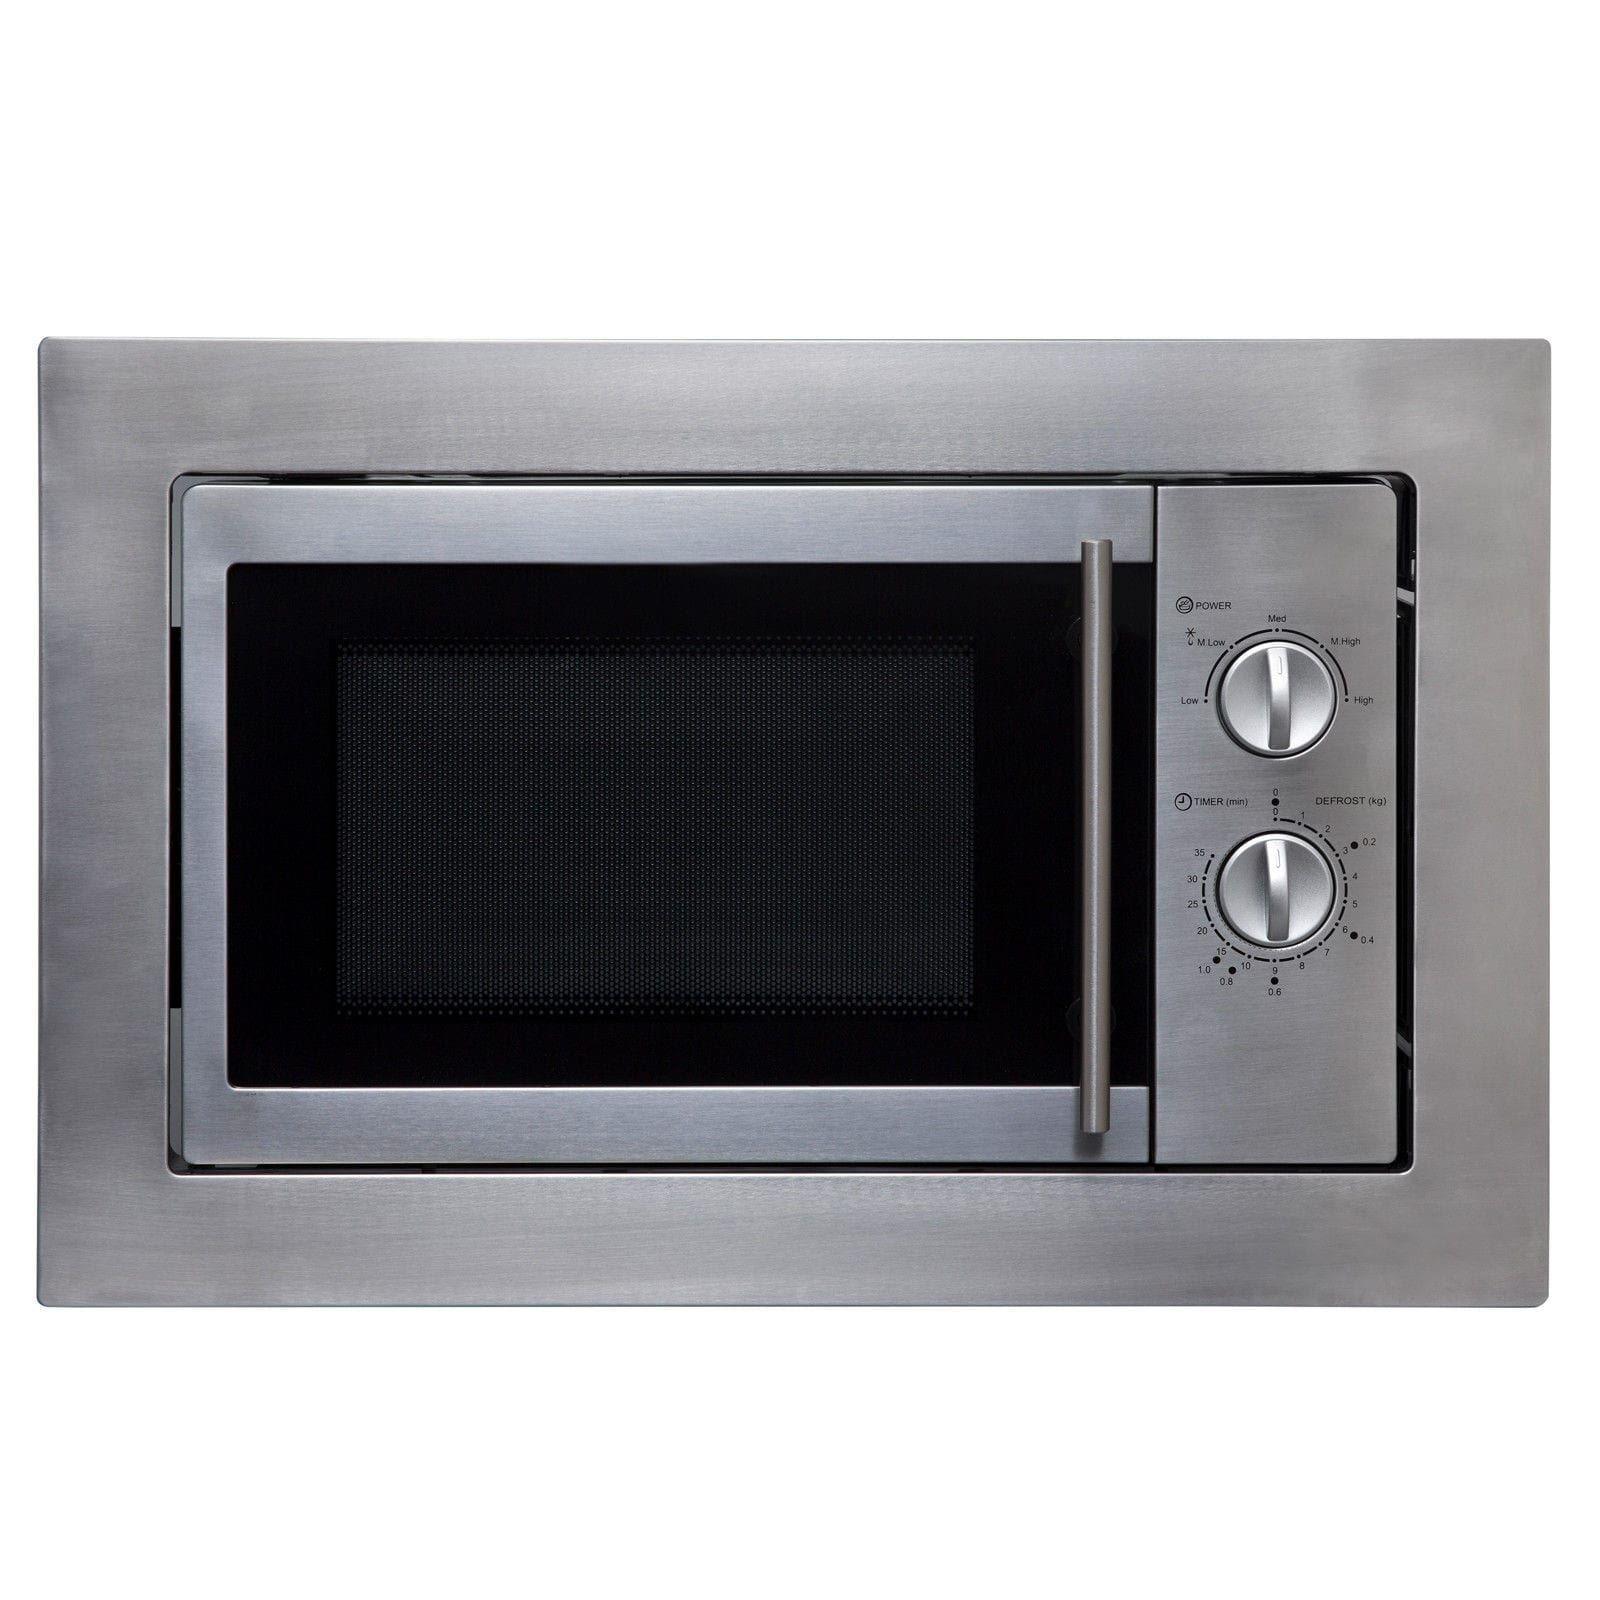 BIM10SS 20L Integrated Built in Microwave Oven in Stainless Steel